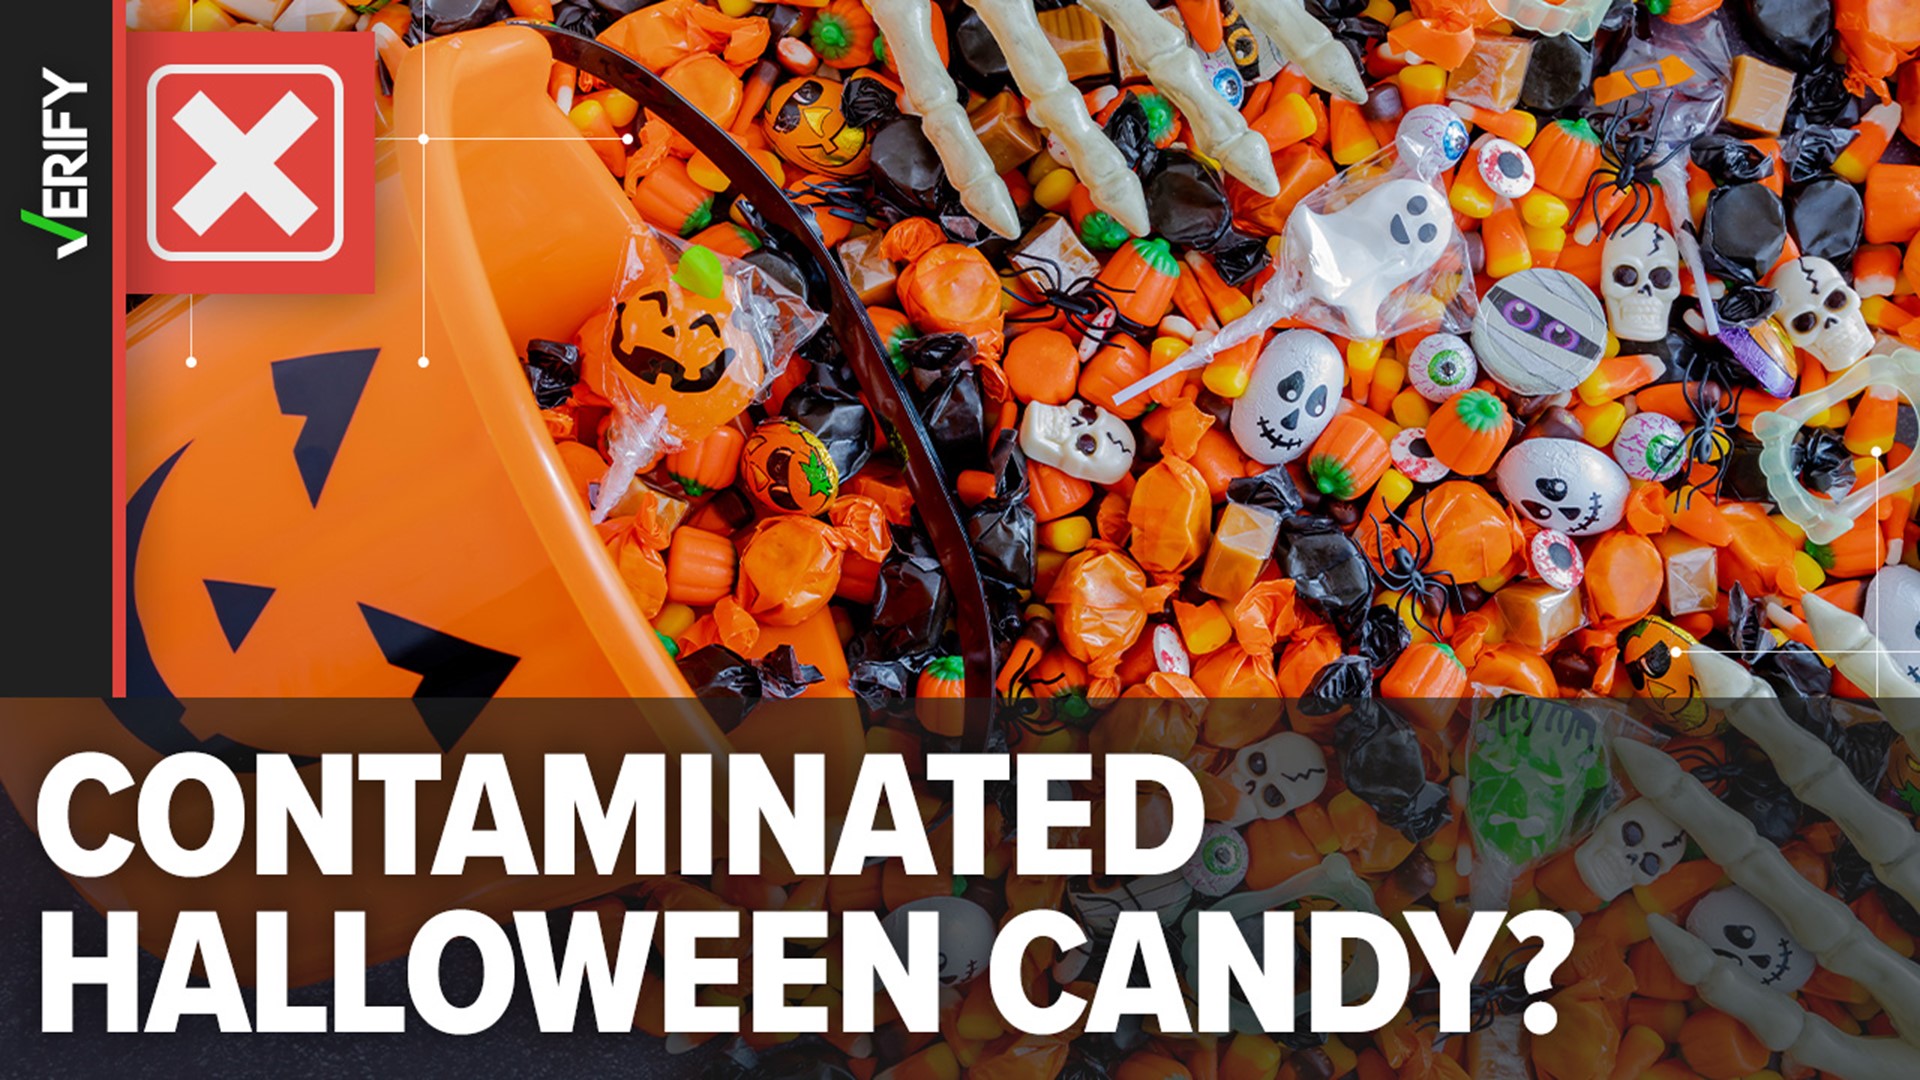 Experts say legitimate reports of children being harmed by contaminated Halloween candy are best understood as urban legends.